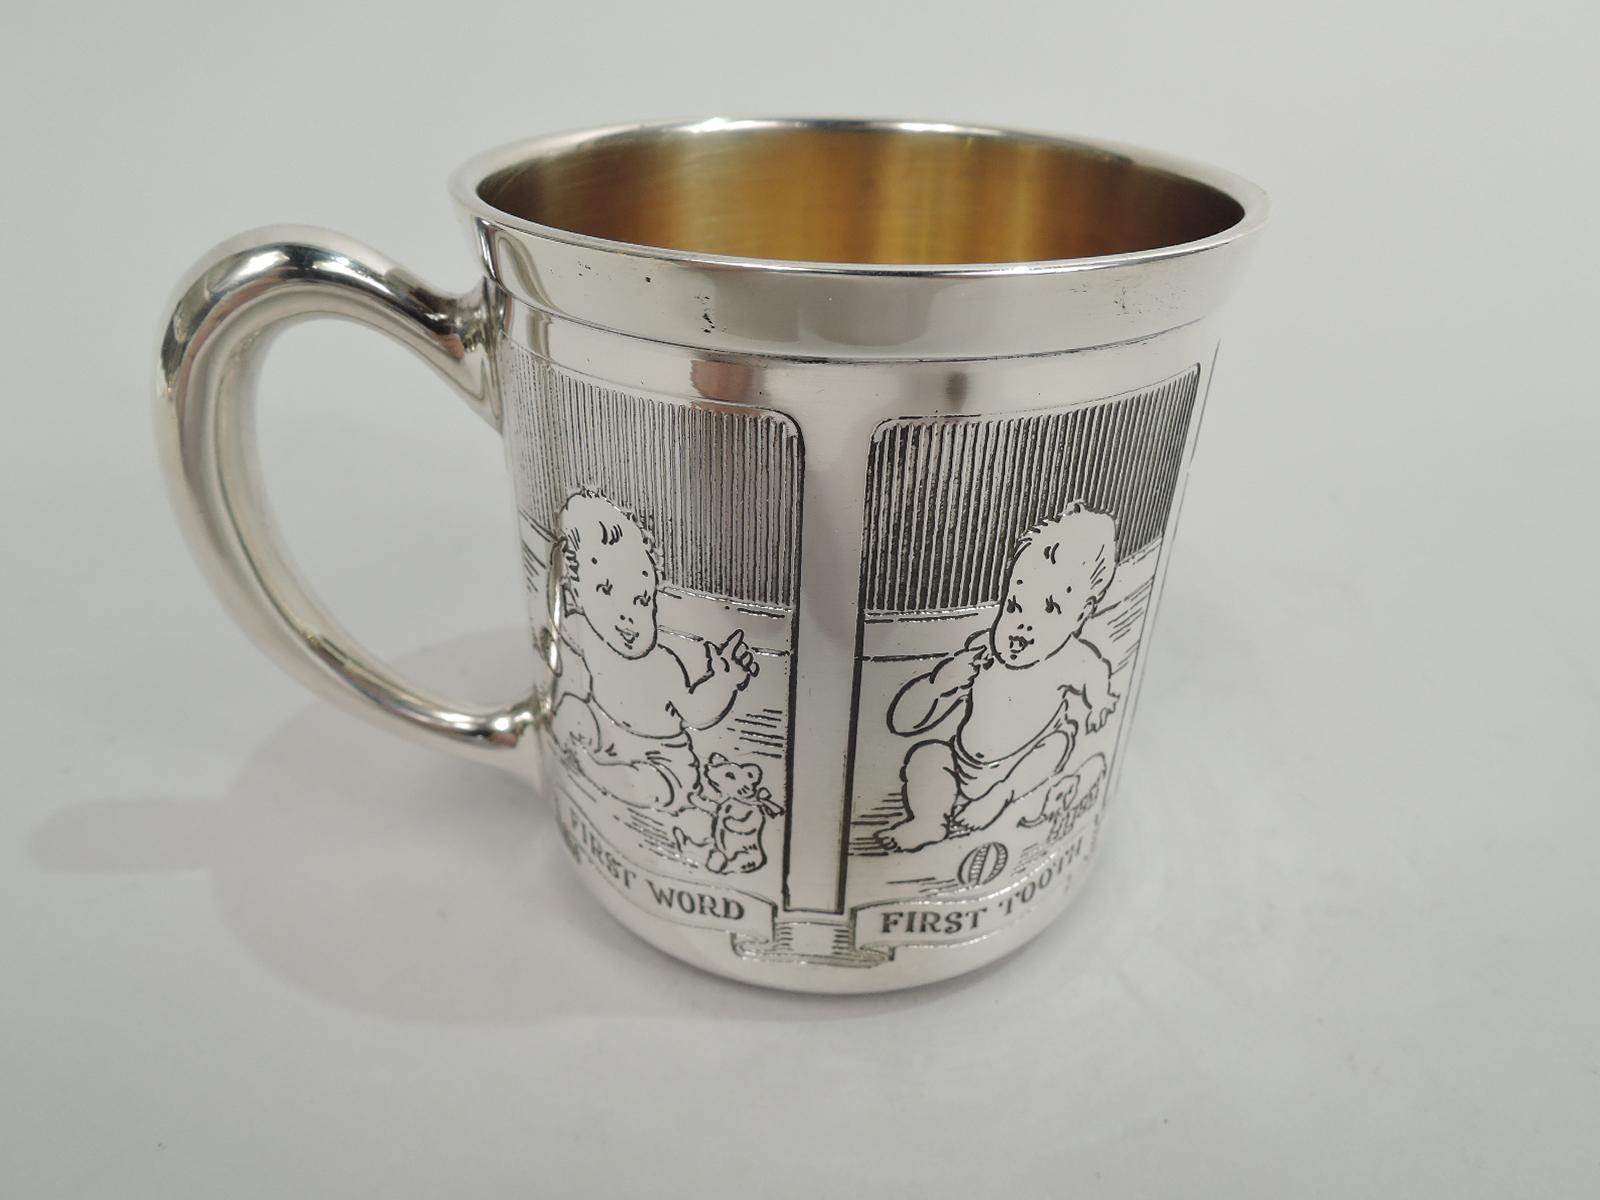 First Step sterling silver baby cup. Made by Blackinton in North Attleboro, ca 1920. Straight sides and c-scroll handle. Rectangular frames with sweet fat baby achieving baby firsts: Word, tooth, creeping, and step. Another frame for engraving the